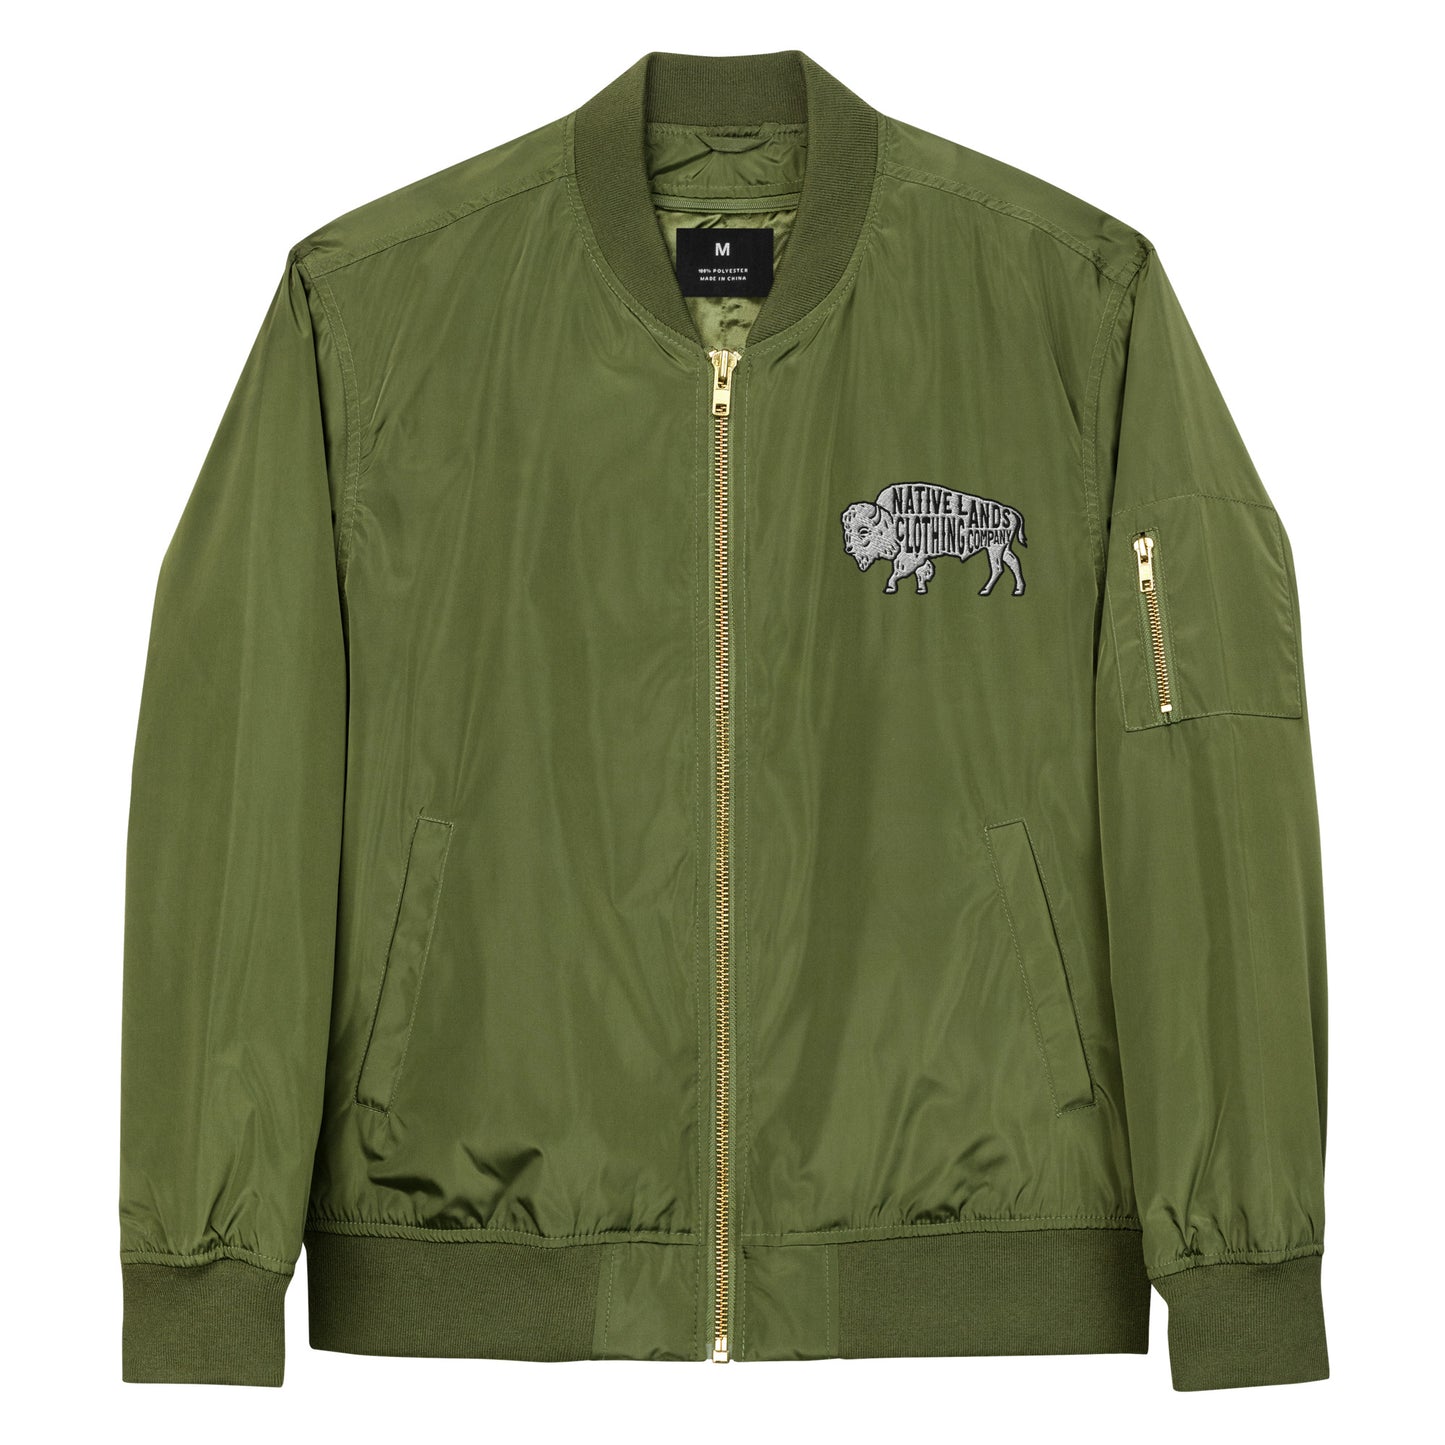 Bison Bomber Jacket Recycled Embroidered Native American